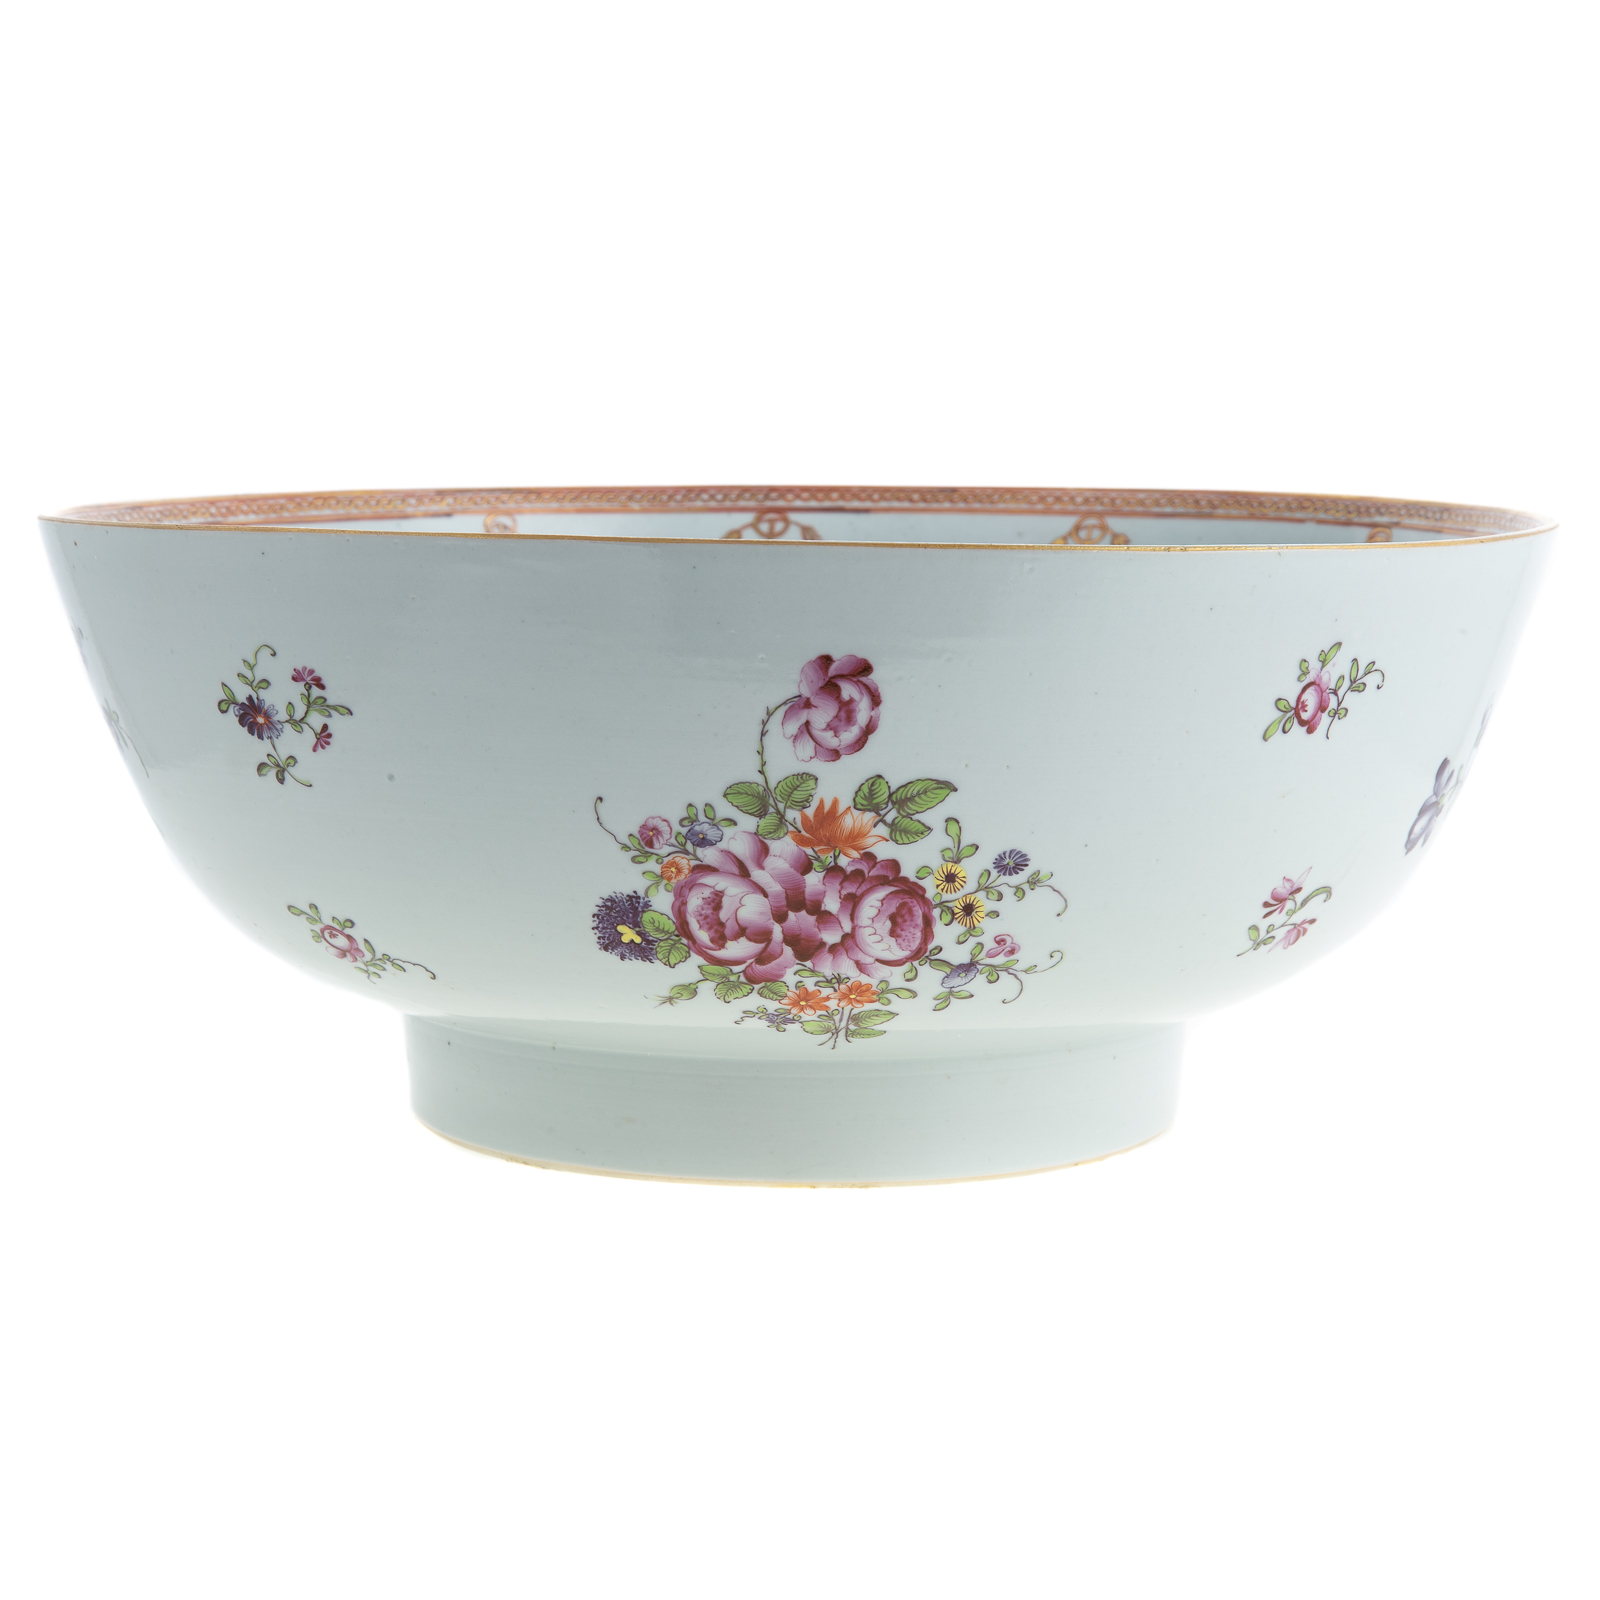 CHINESE EXPORT FOOTED PUNCHBOWL 29de99